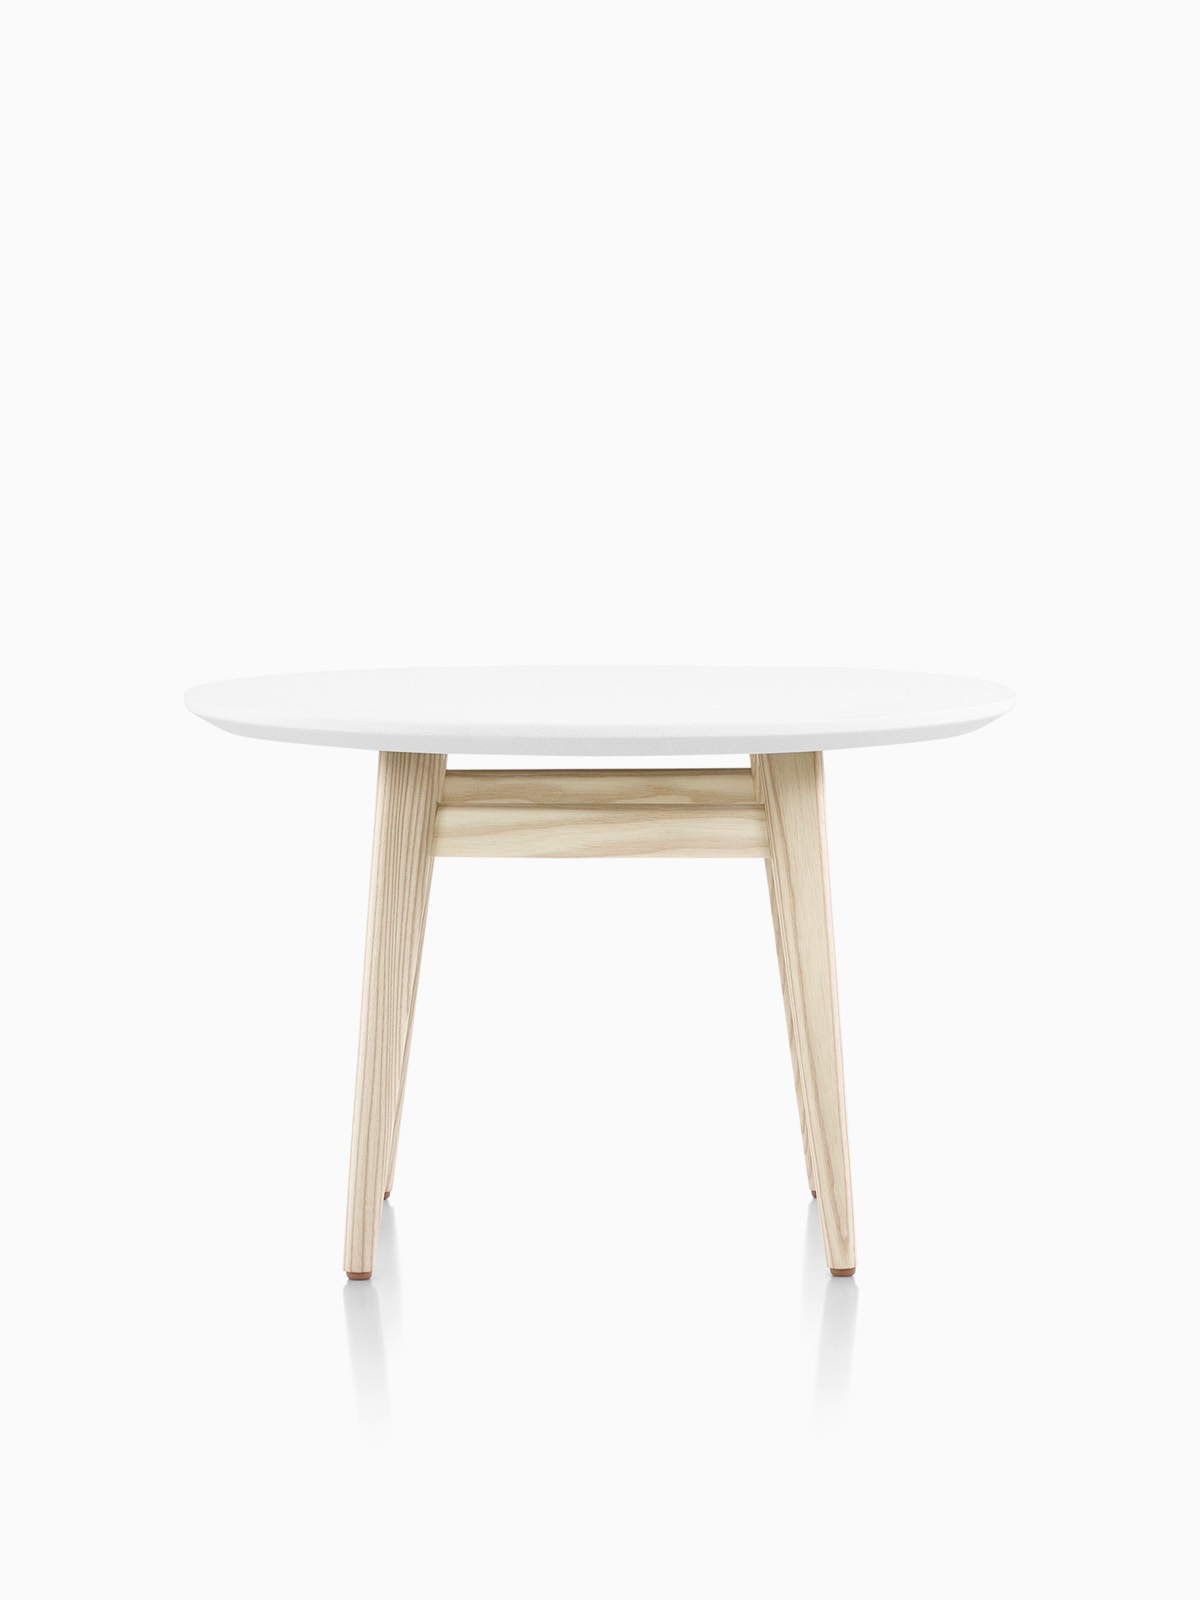 Round Palisade Side Table with white surface and wood legs.